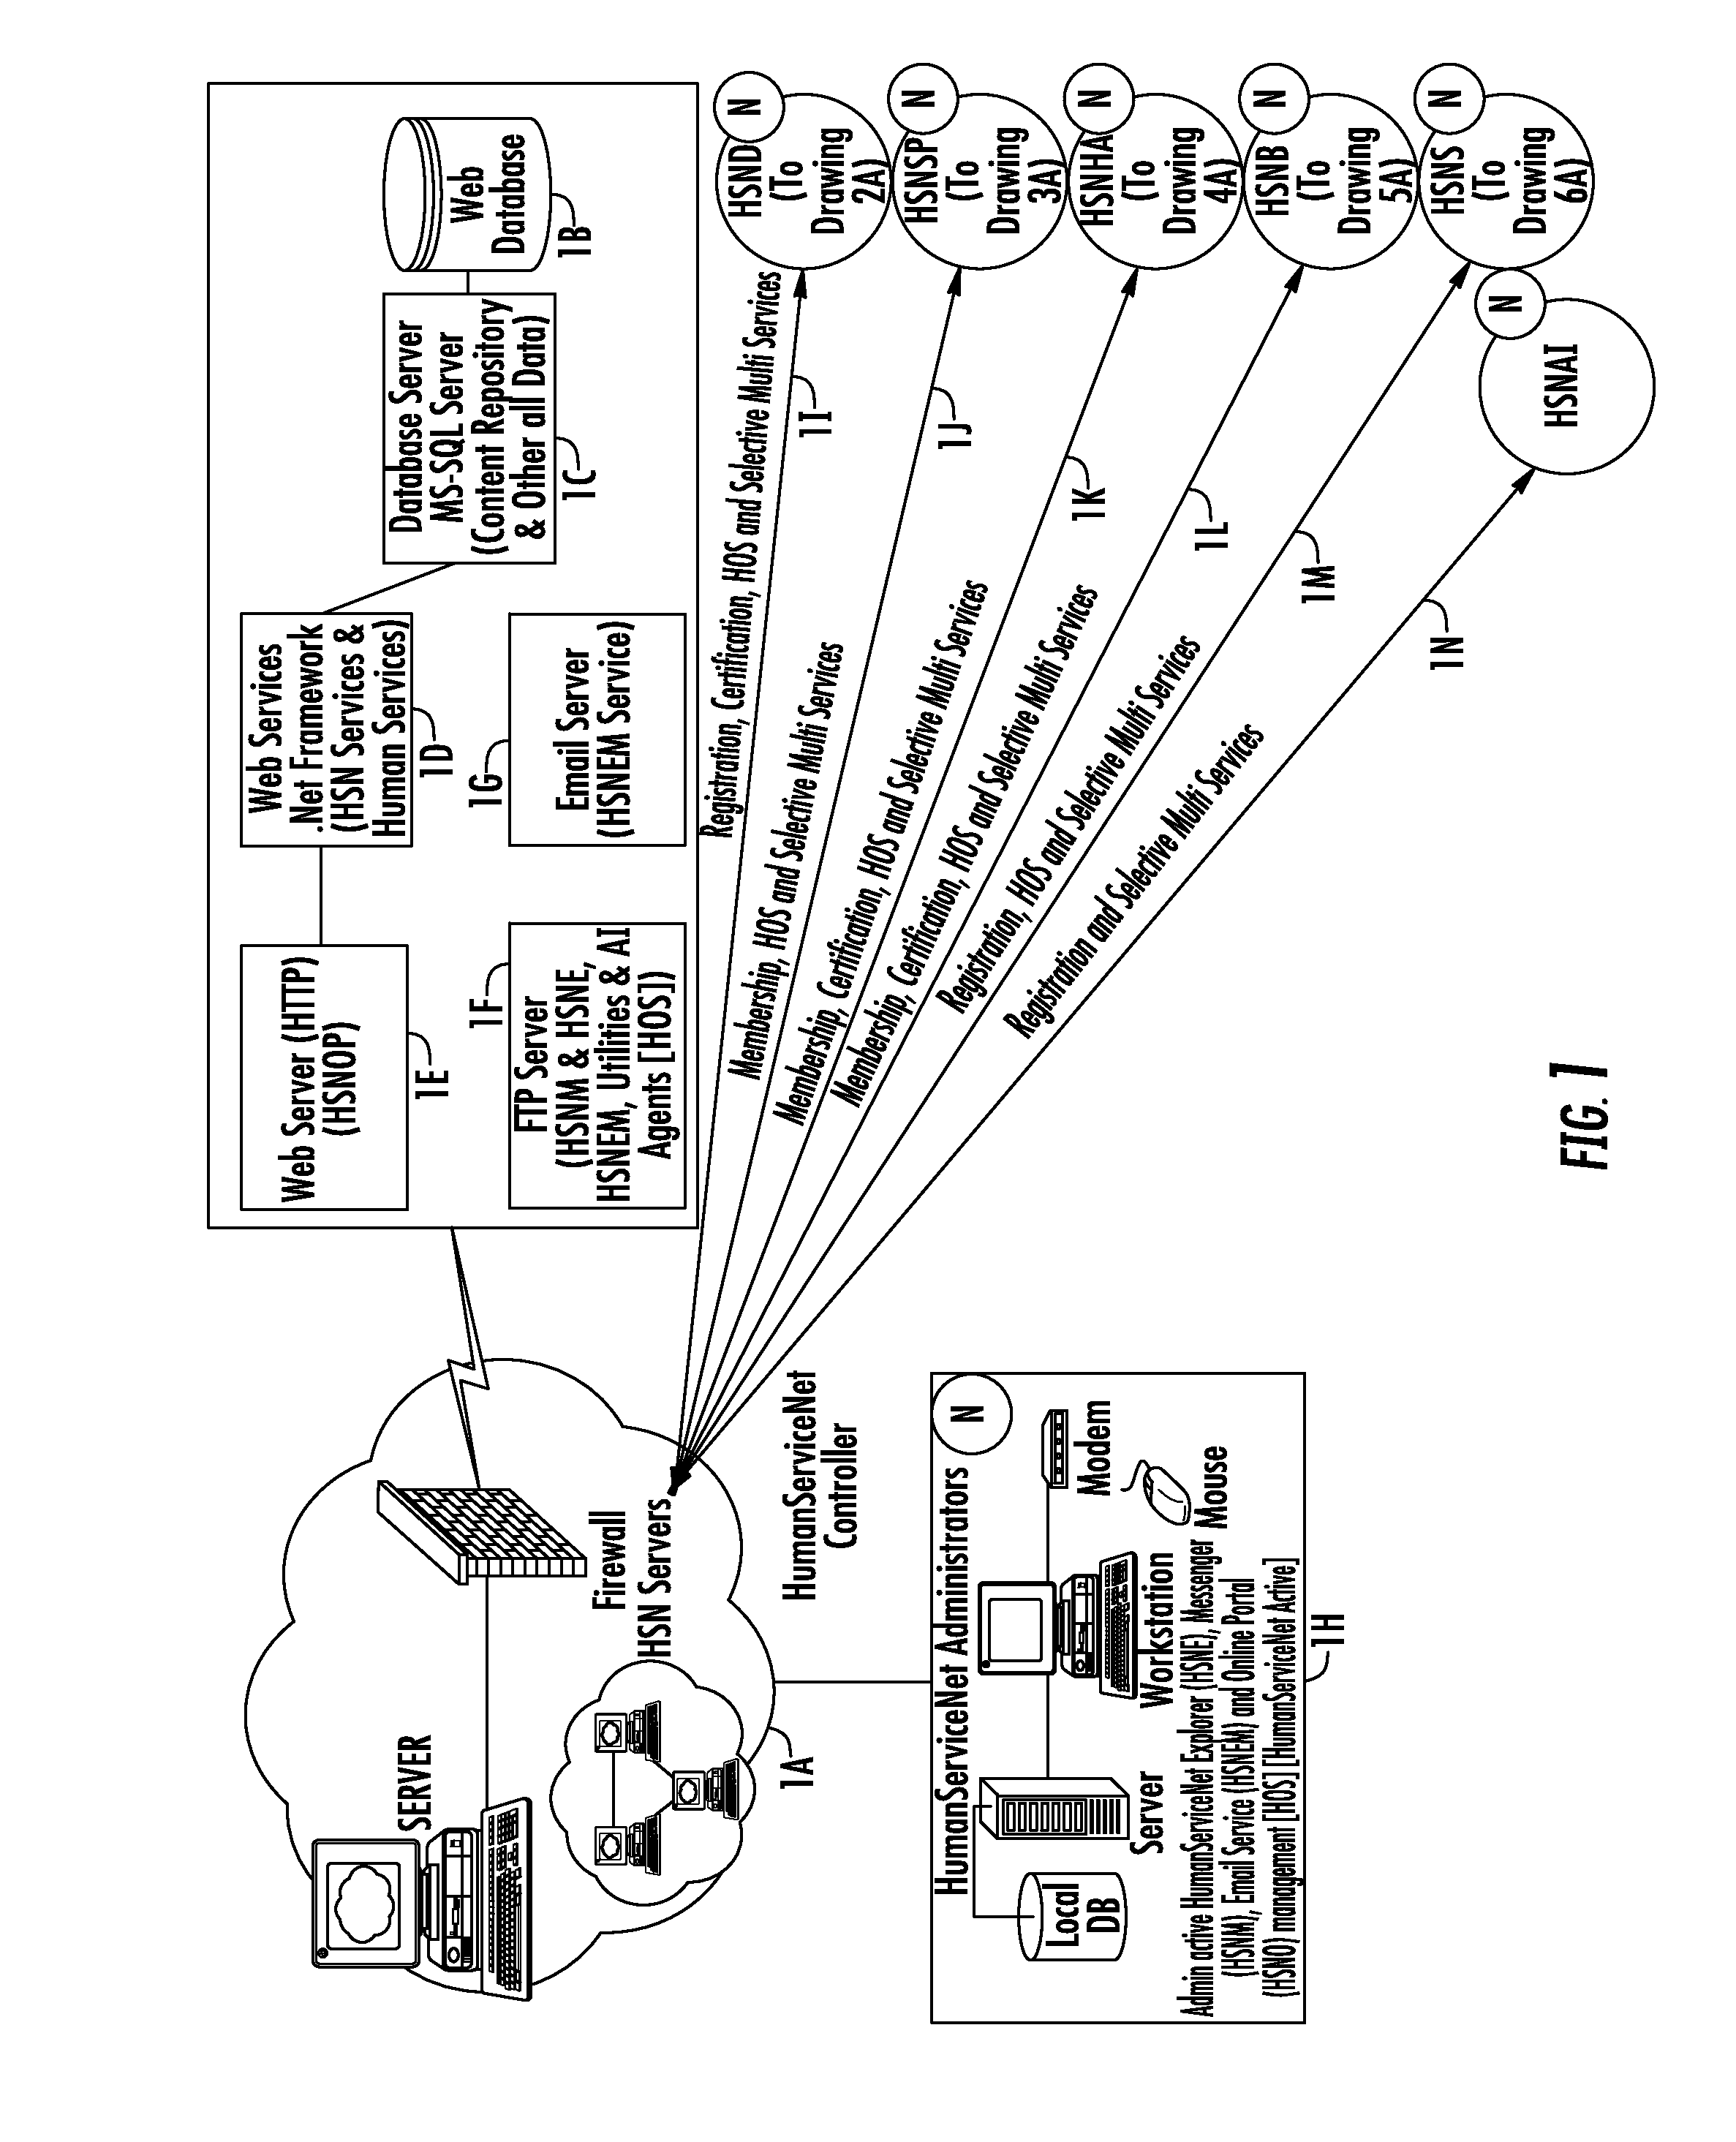 System and method for accessing applications for social networking and communication in plurality of networks